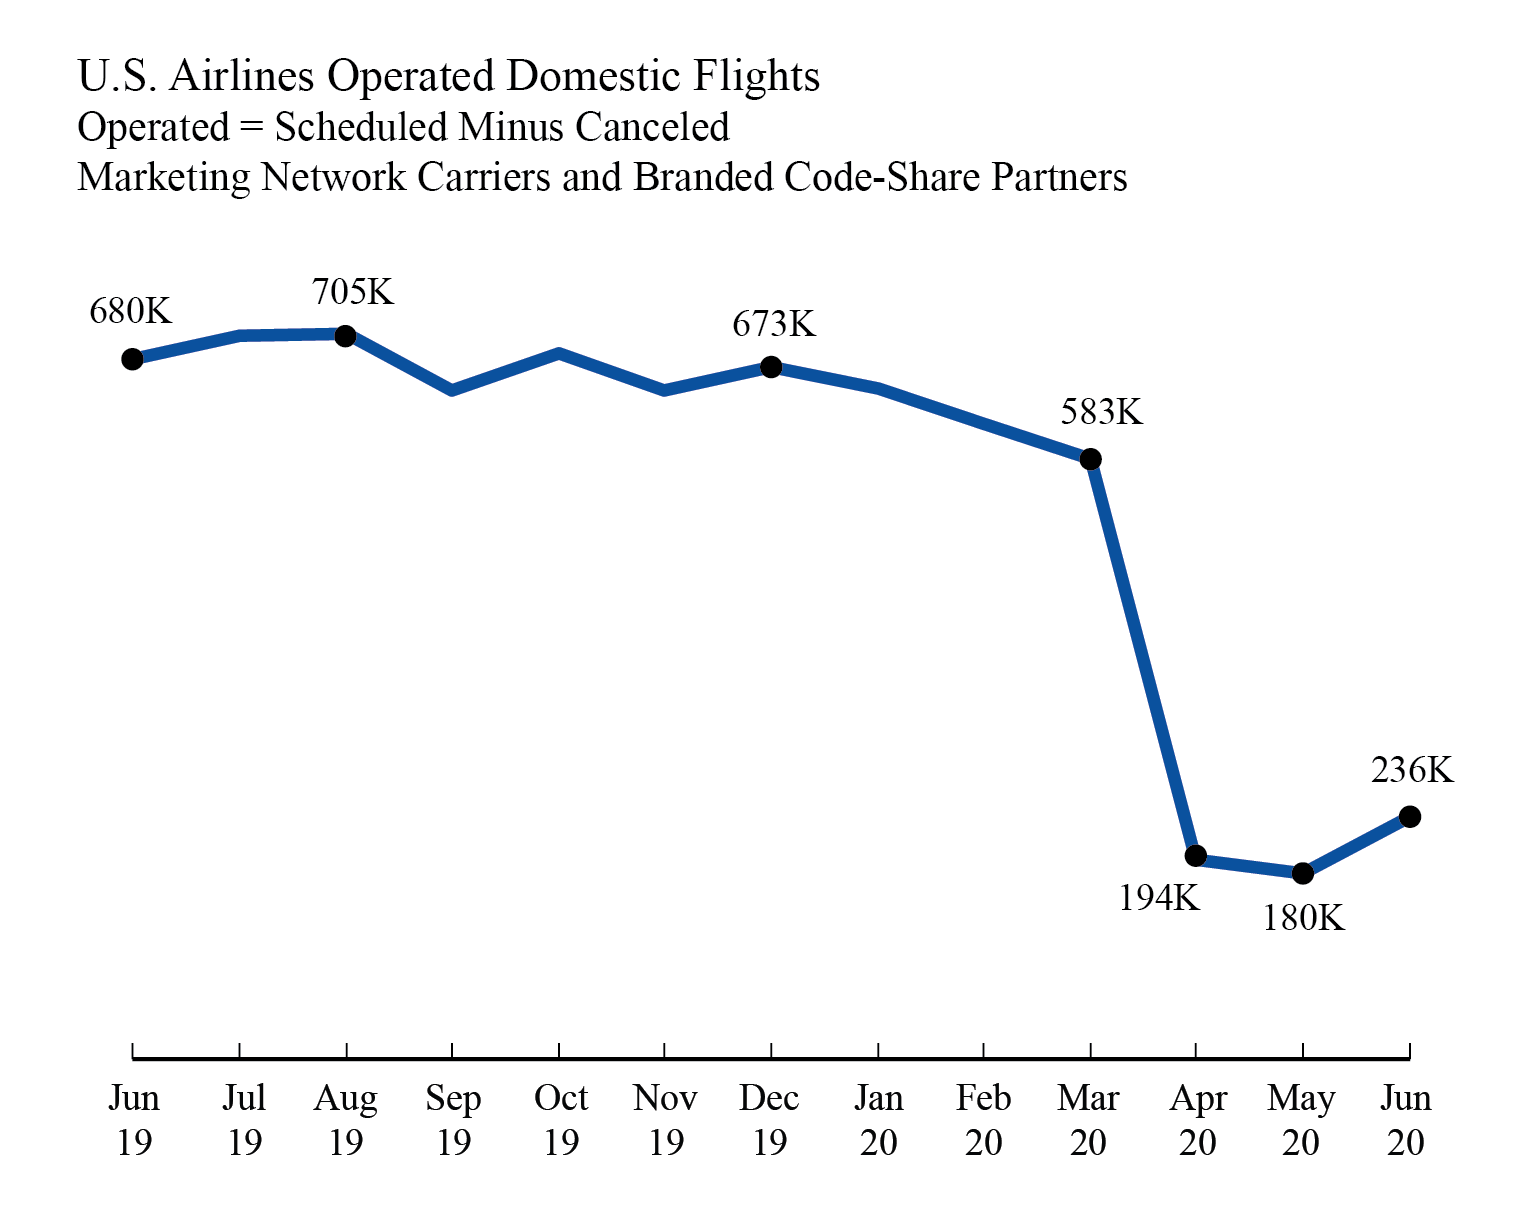 Airline On-Time/Cancellation Data, June 2020